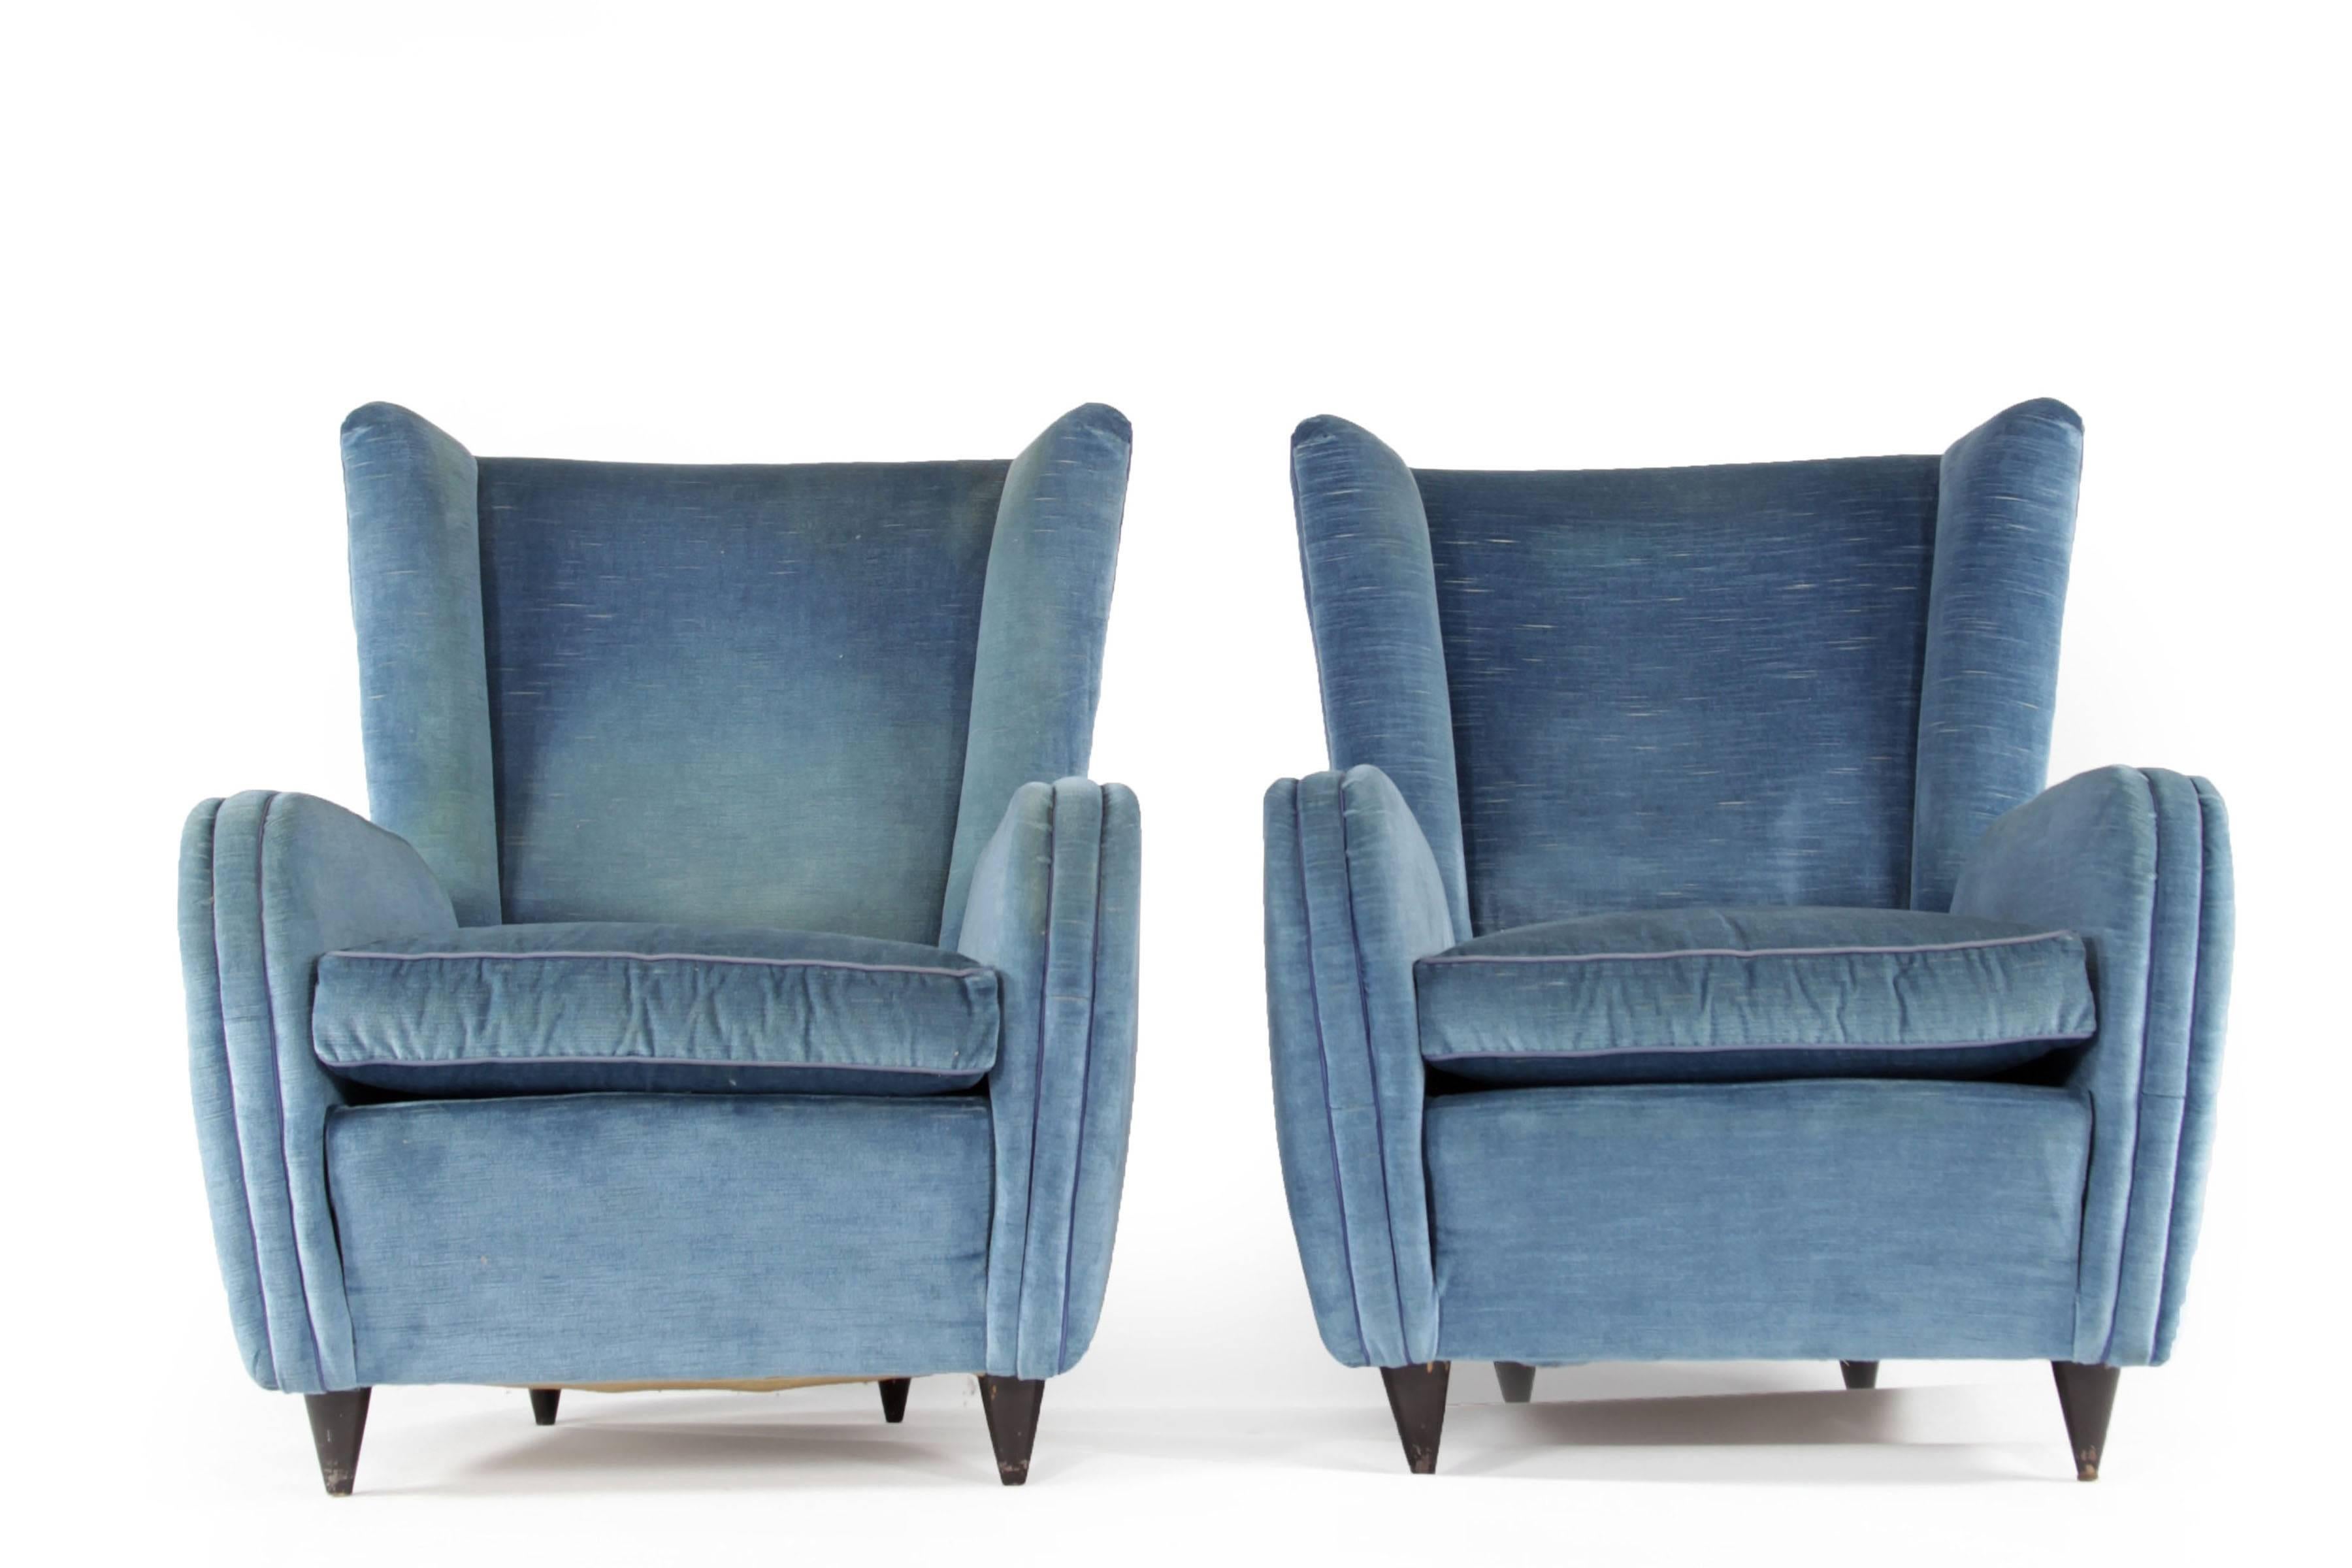 Set of two chairs, design by Paolo Buffa, Italy, 1950s. The chairs are in original condition.